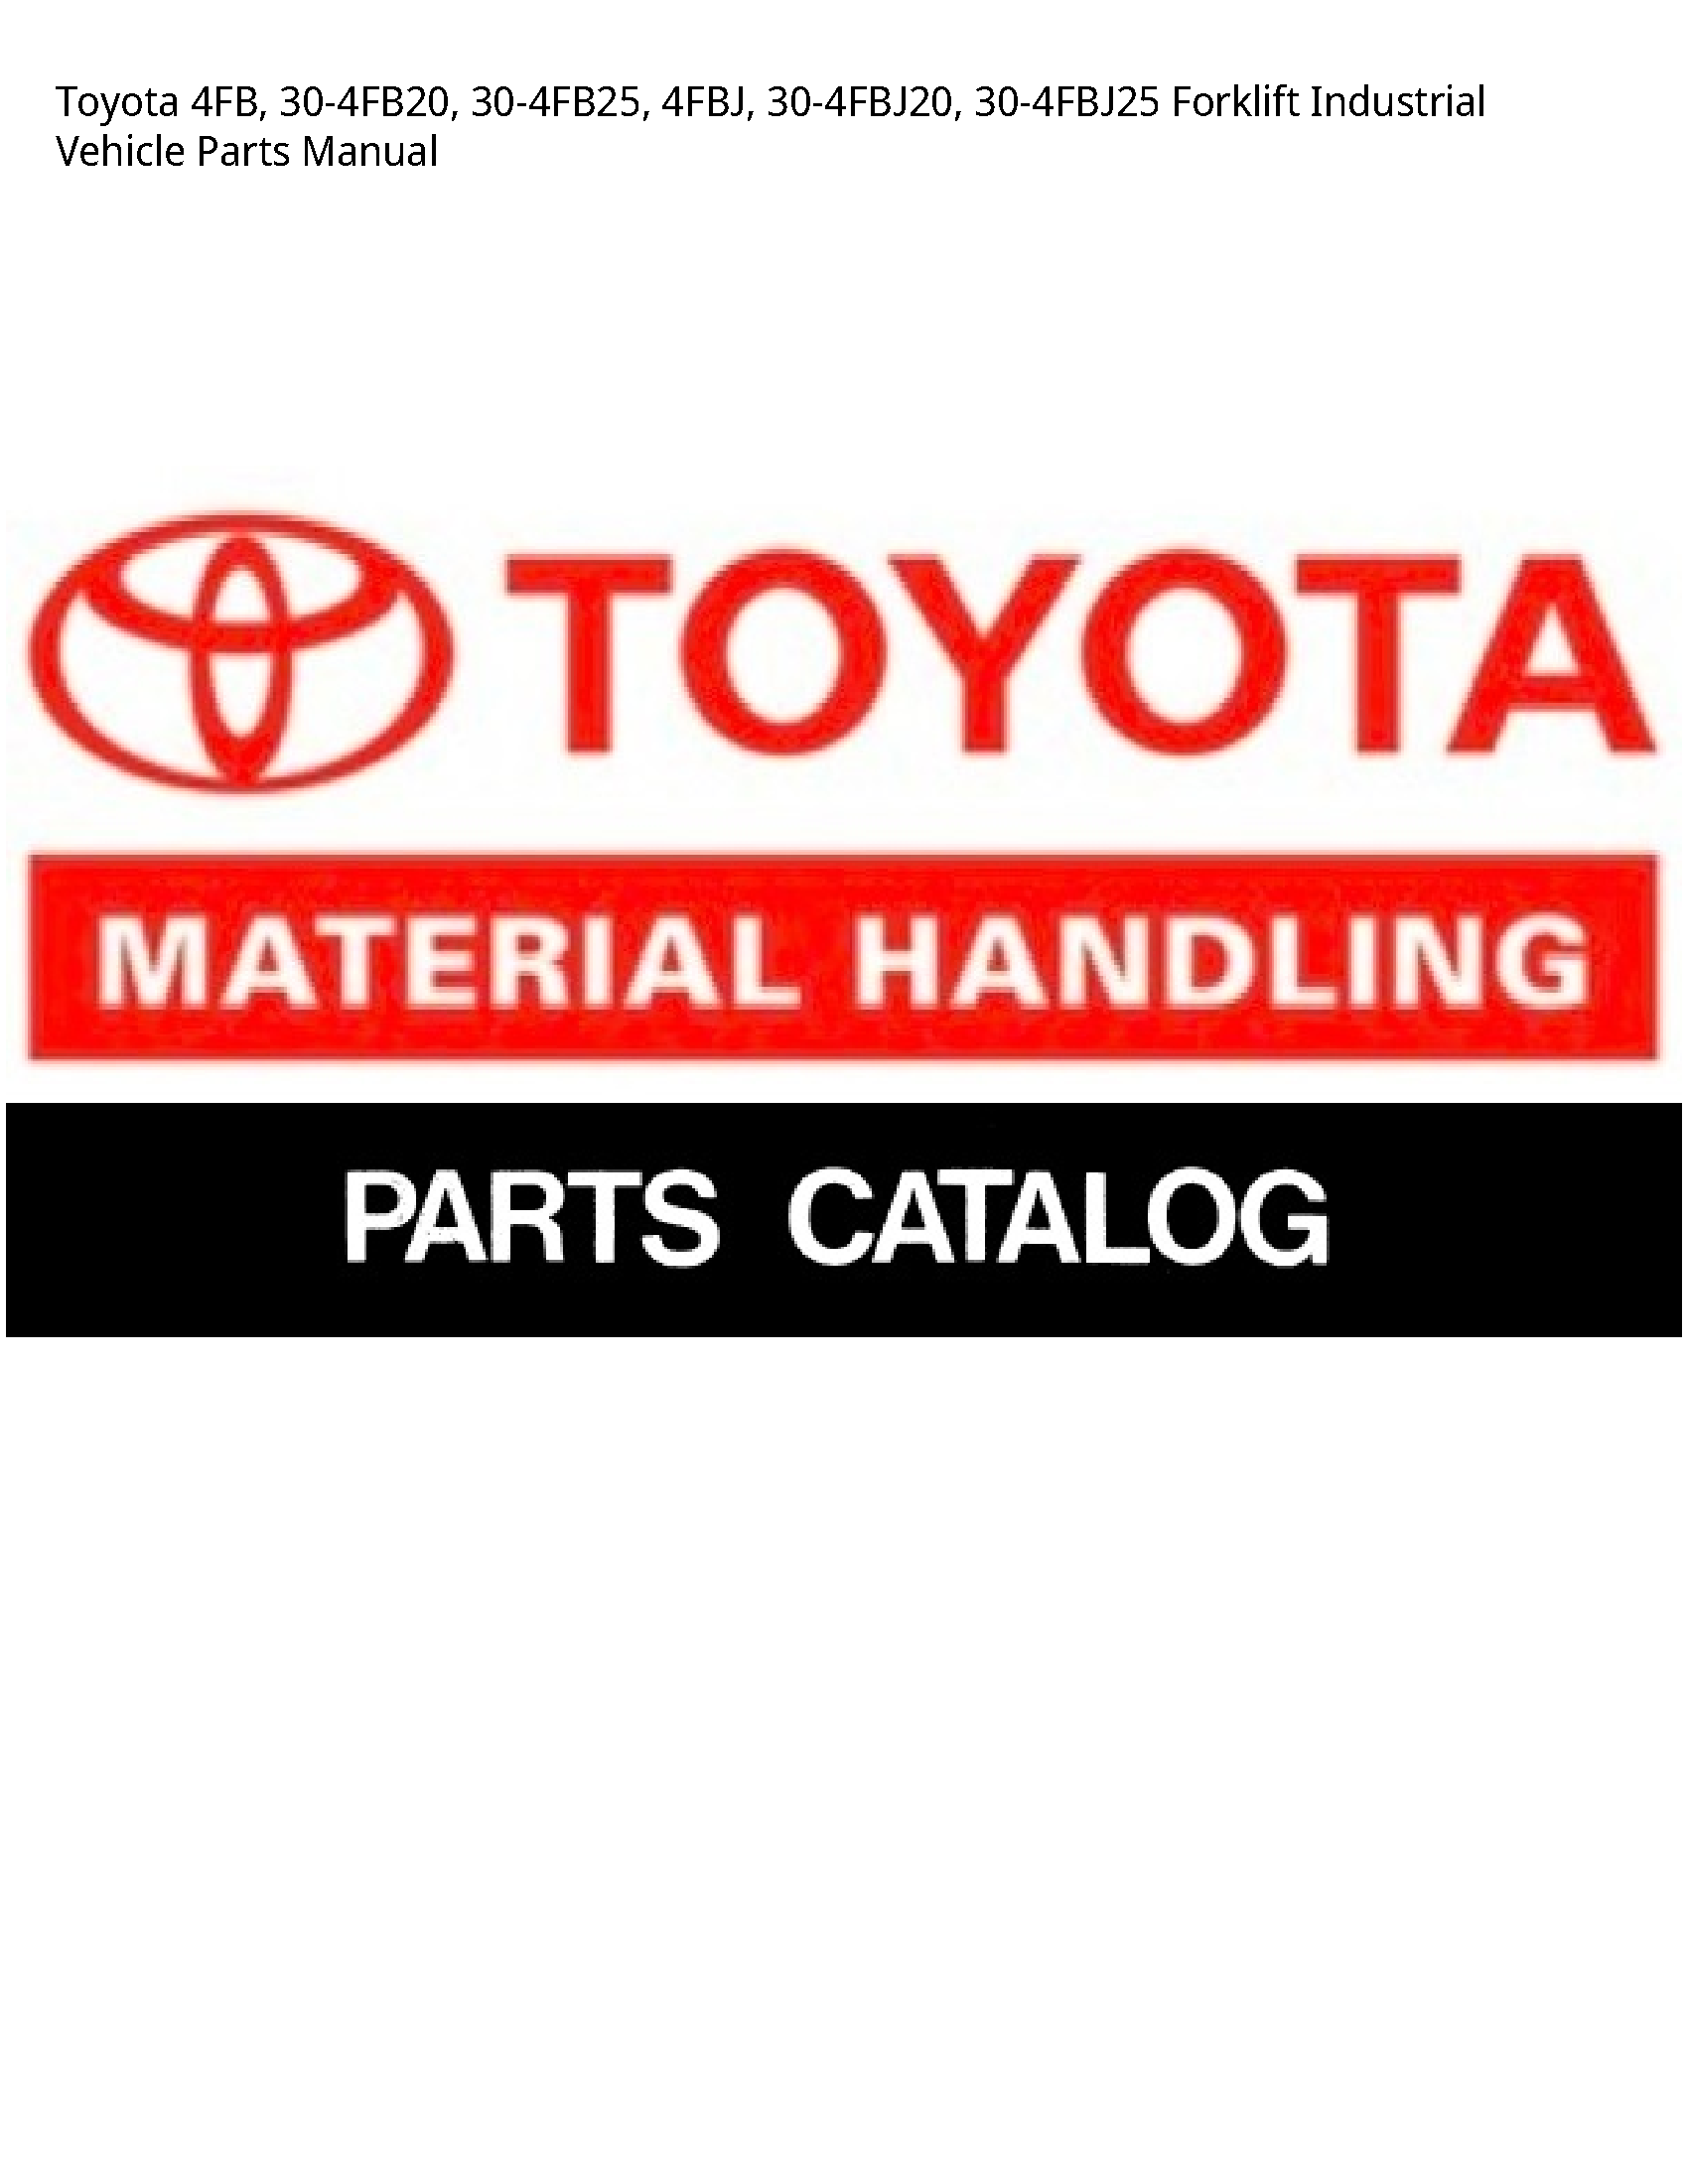 Toyota 4FB Forklift Industrial Vehicle Parts manual